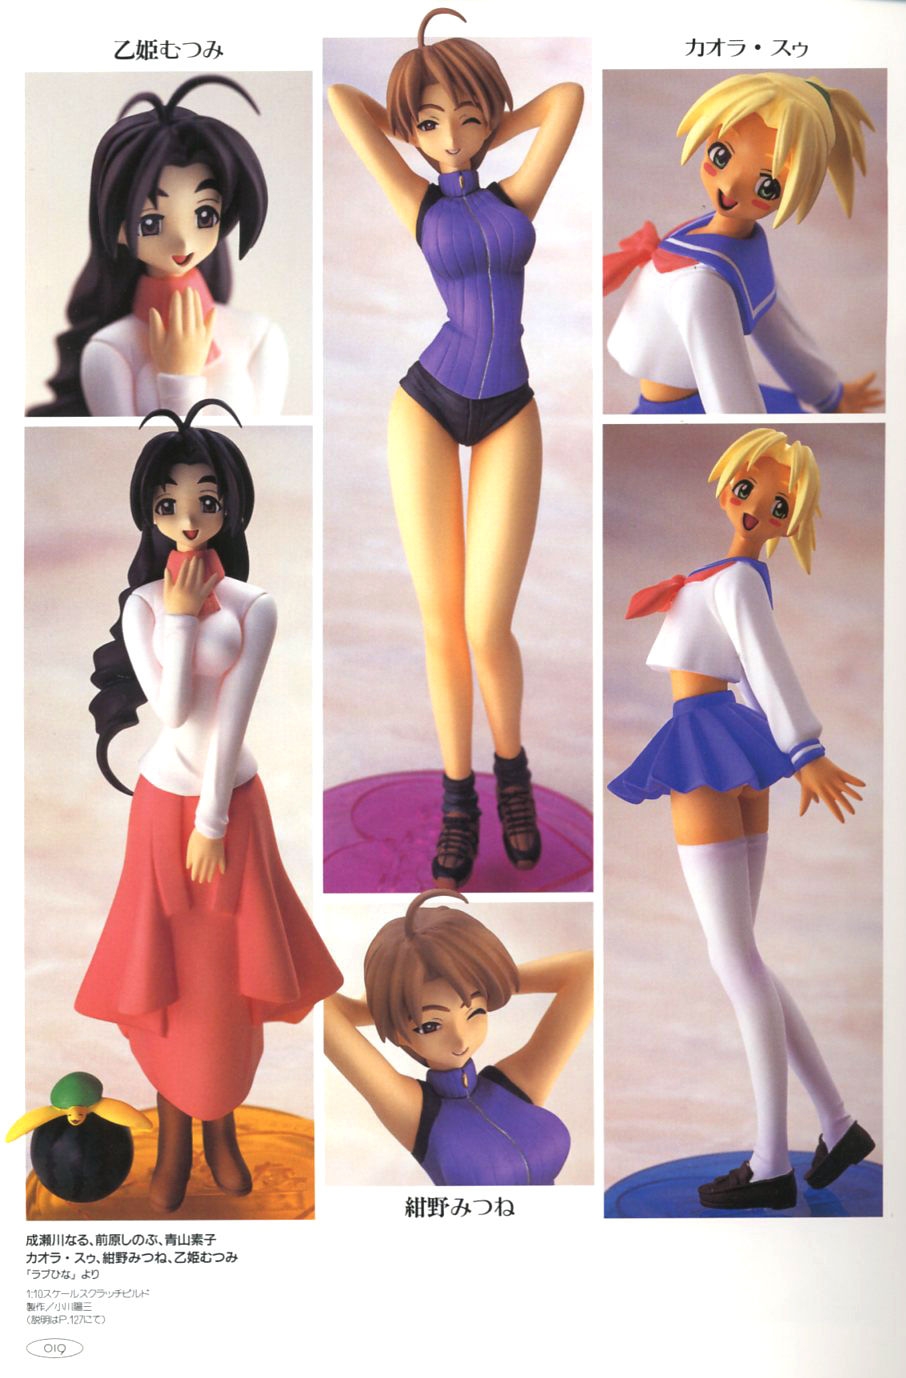 Hobby Japan Mook All That Figure 2001 13